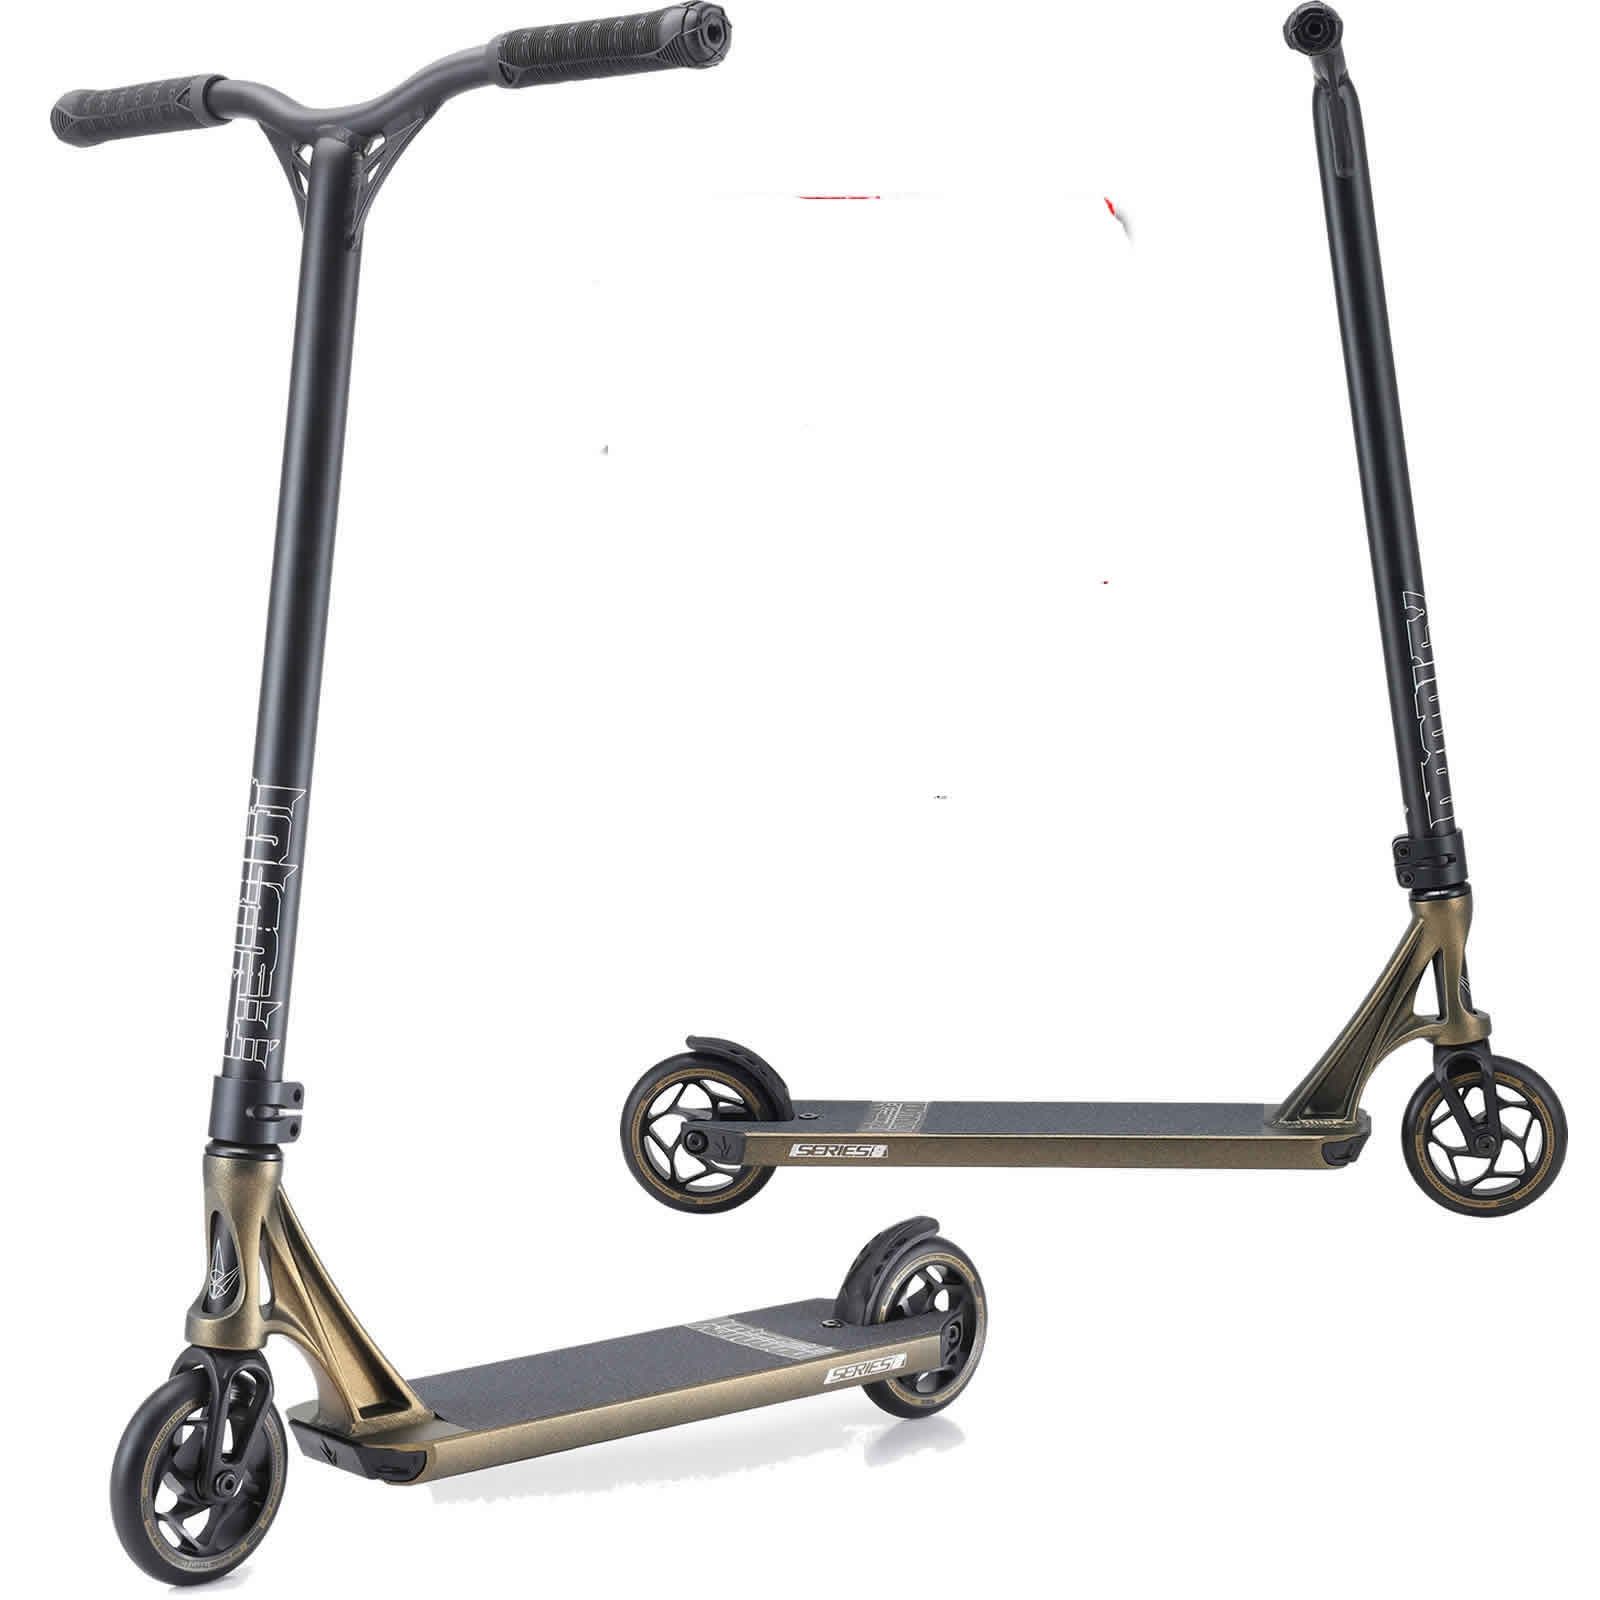 Gold Blunt Envy Prodigy S8 Complete Pro IHC Childrens Stunt Scooter 